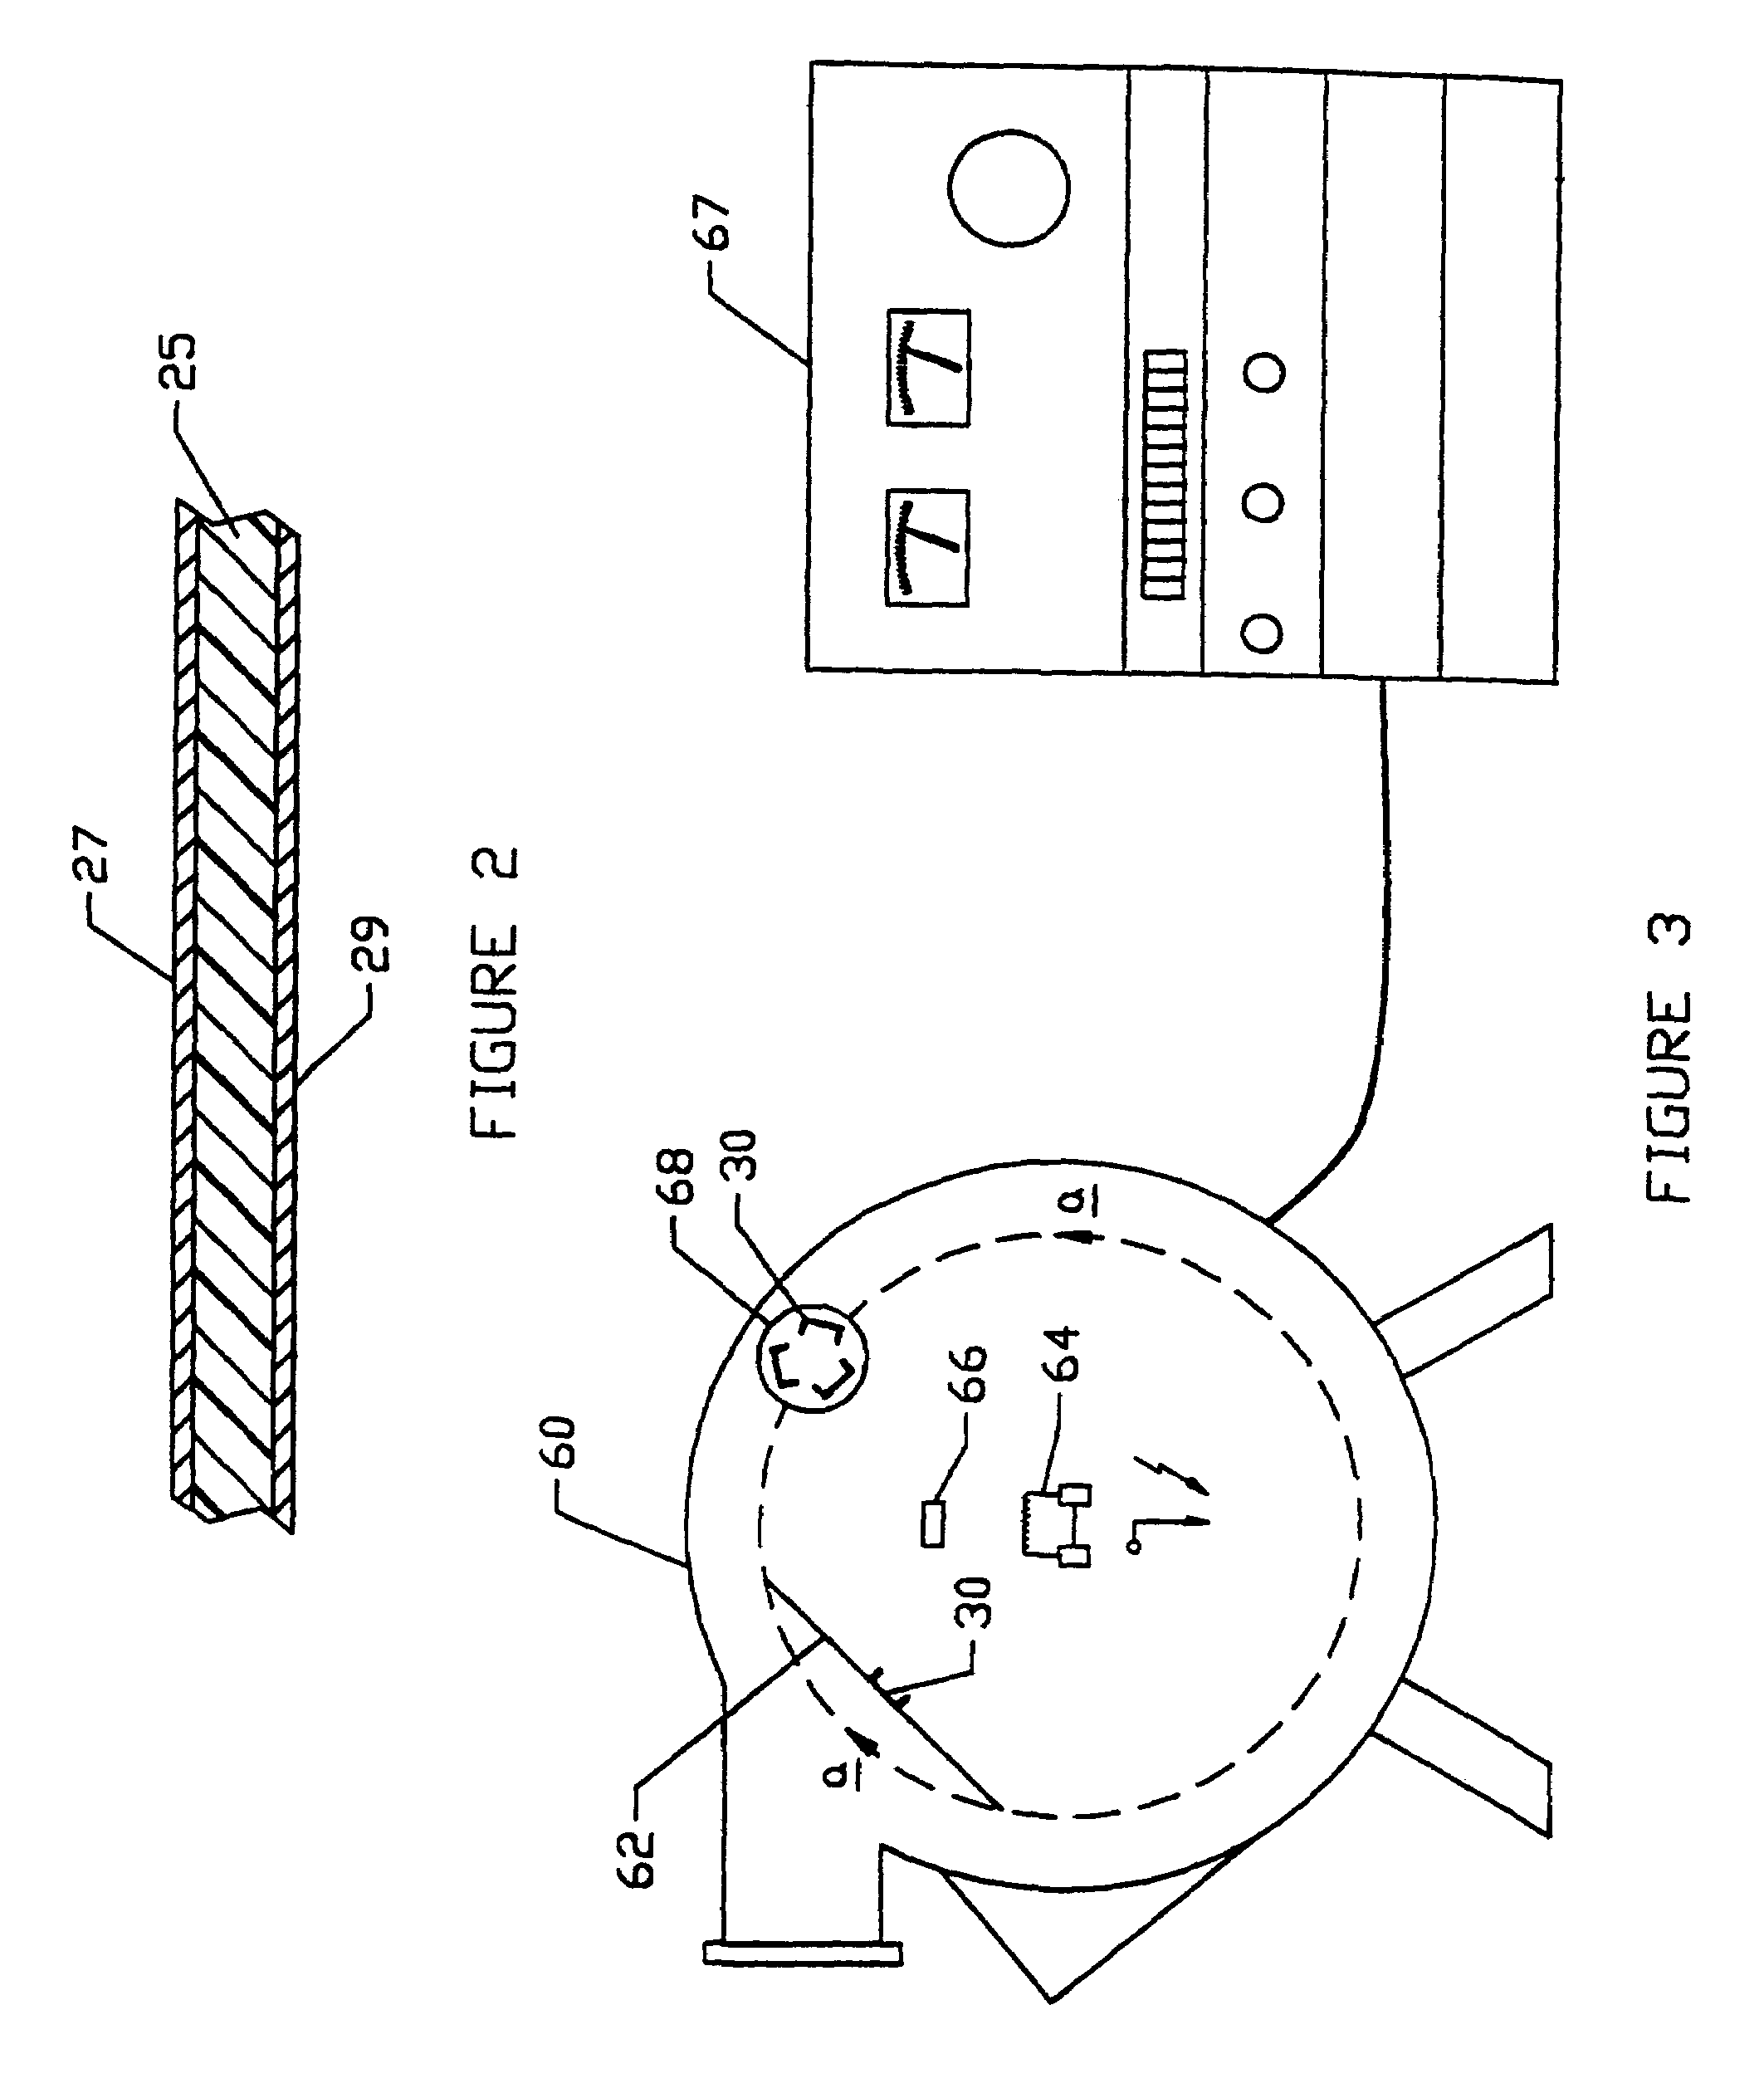 Electromagnetic interference shields for electronic devices